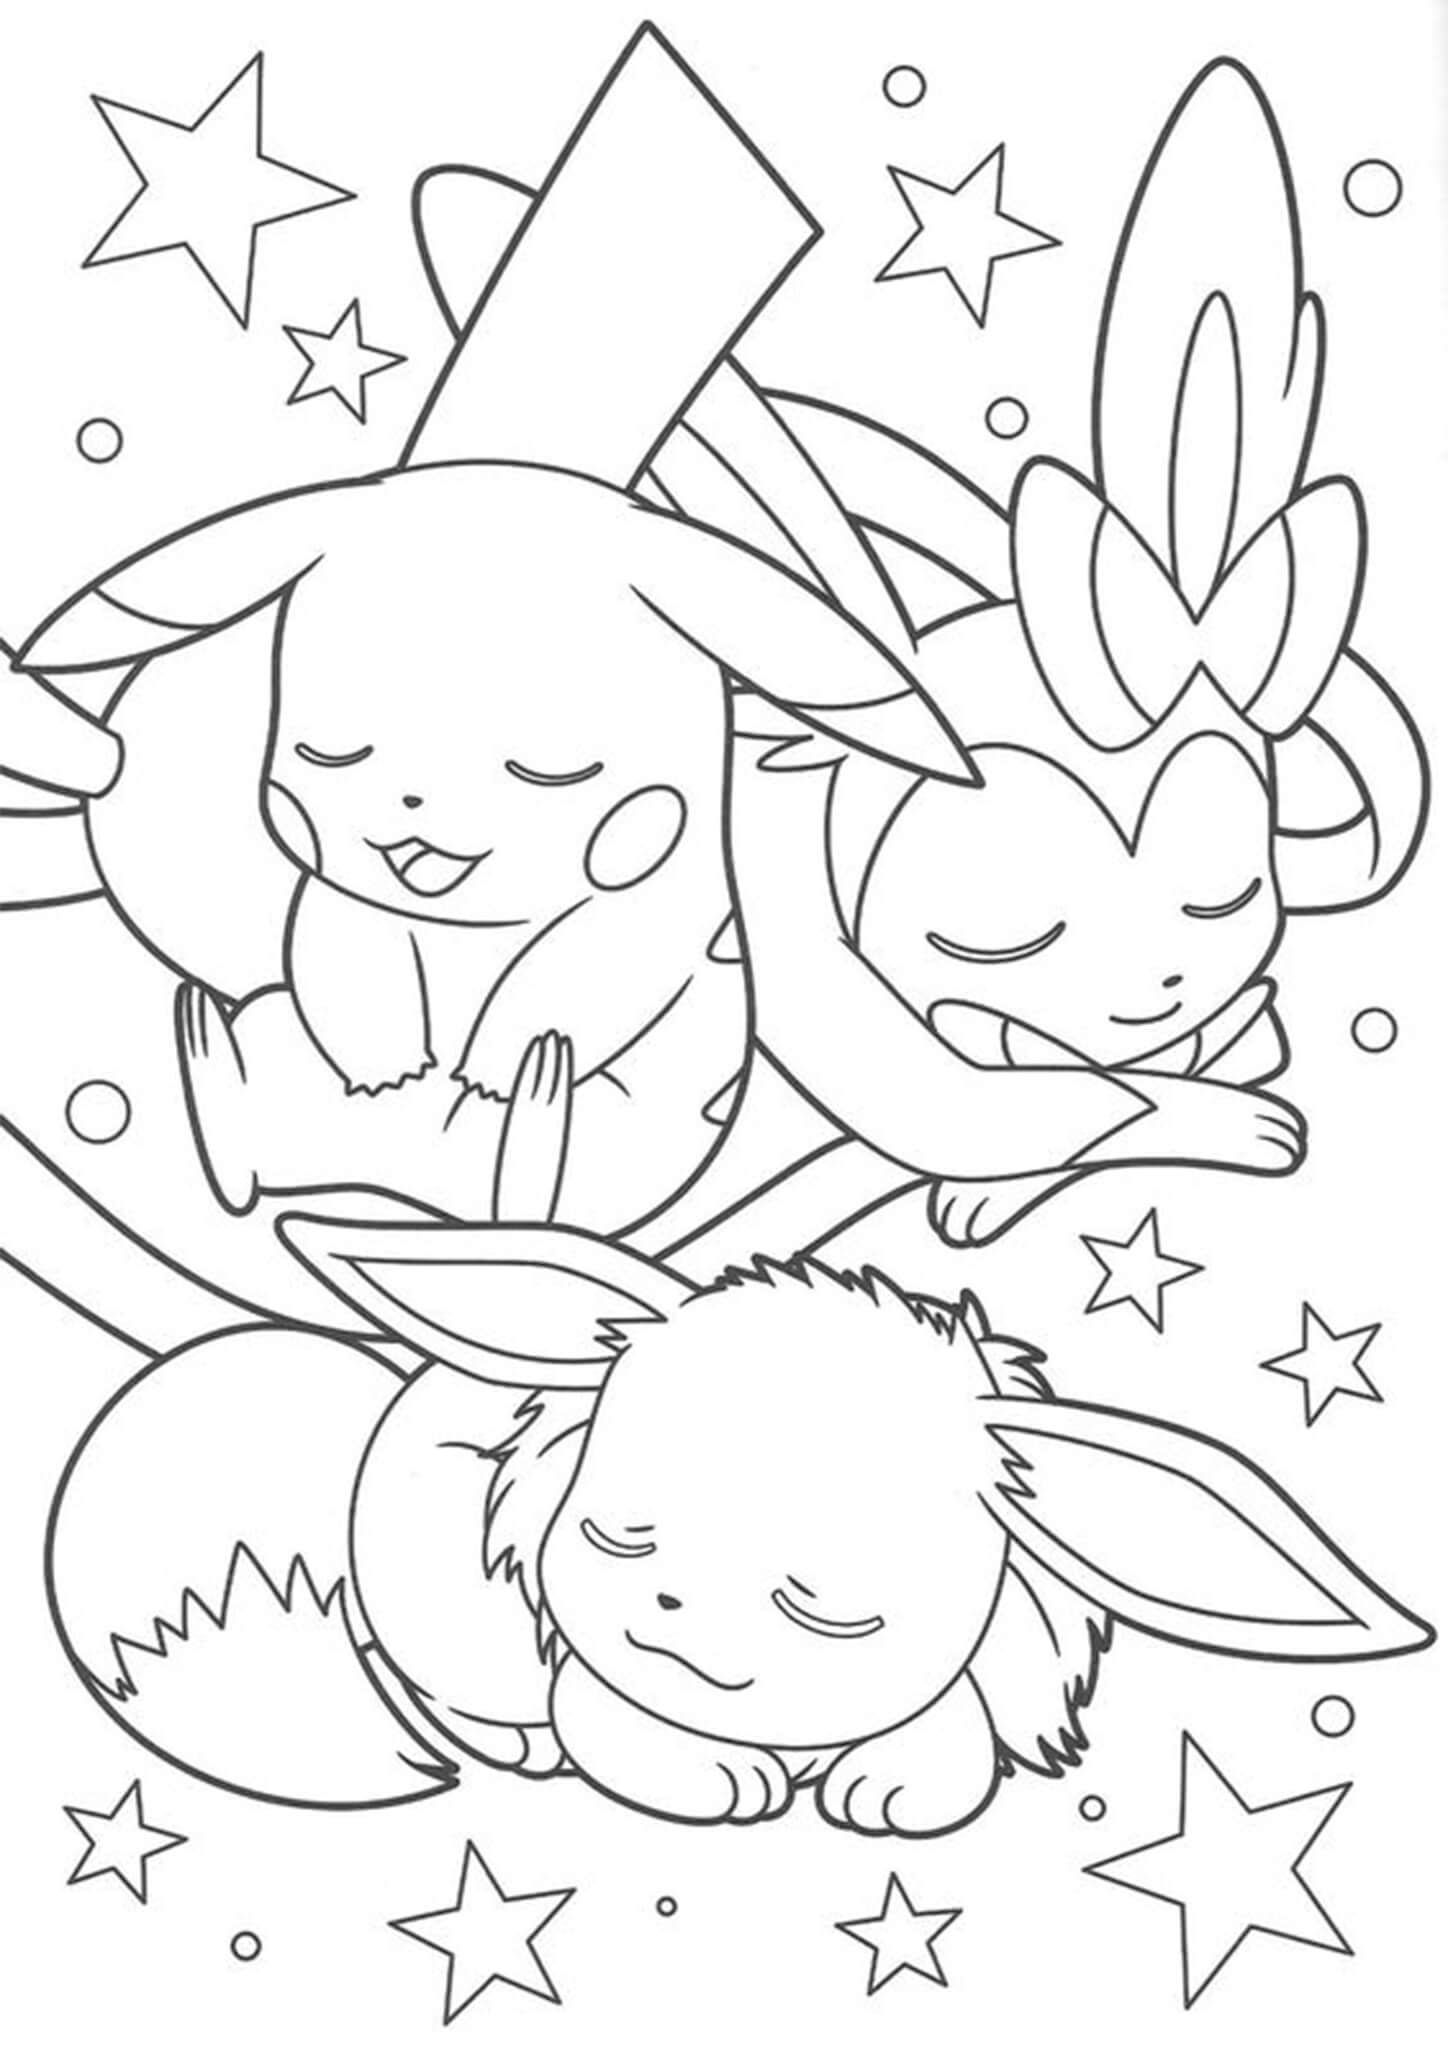 Free easy to print eevee coloring pages pokemon coloring sheets pikachu coloring page pokemon coloring pages